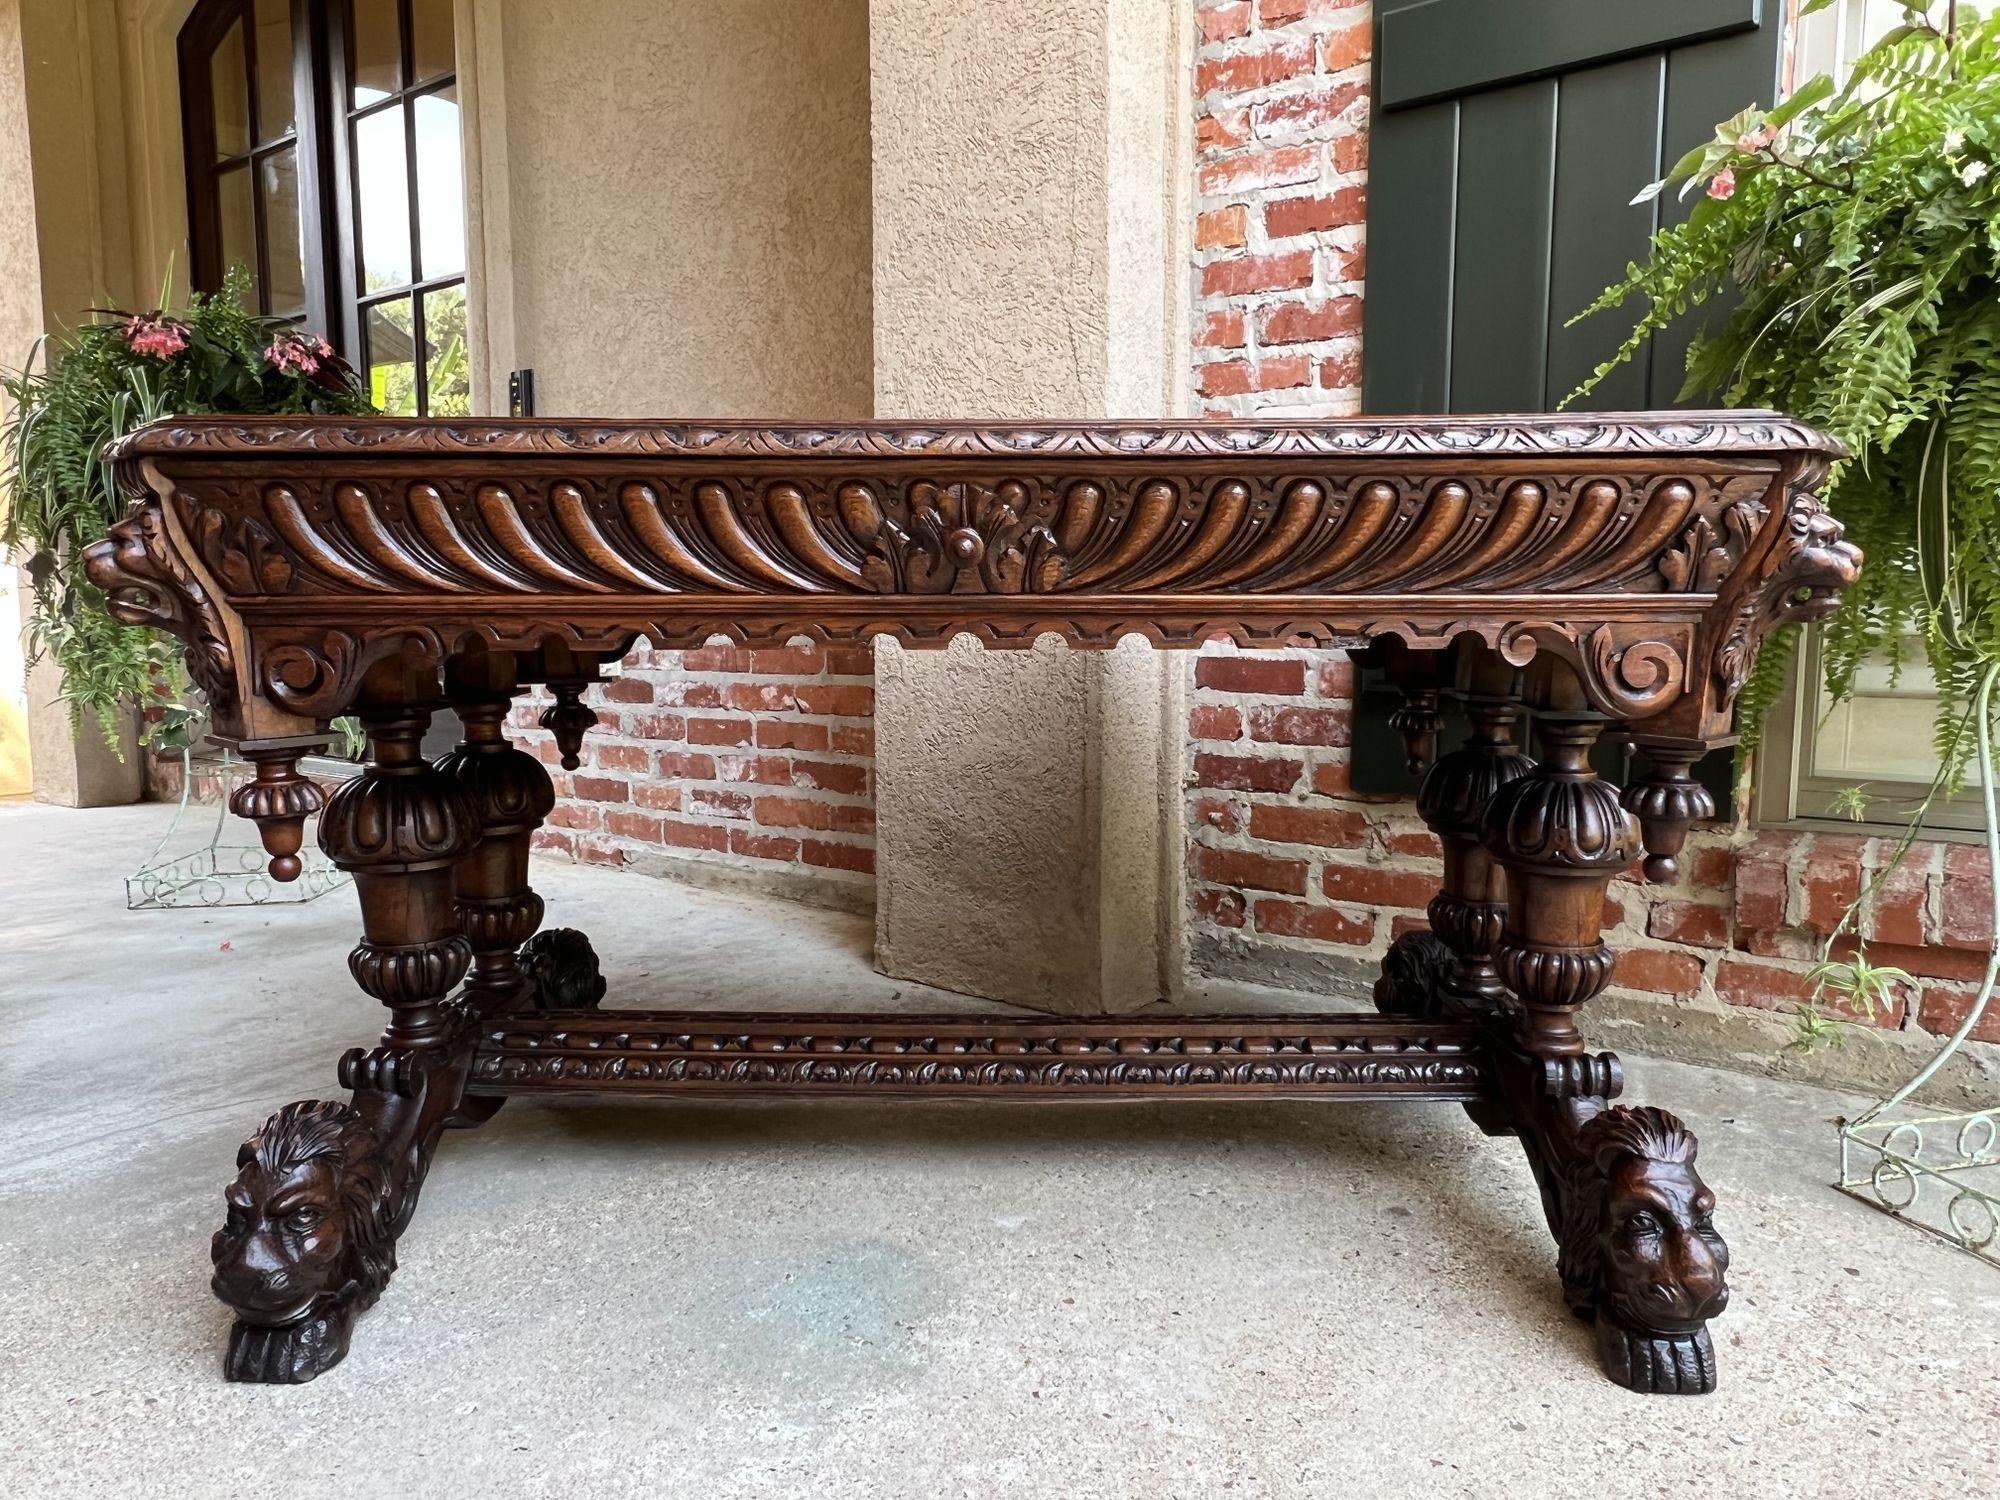 19th century French carved lion library table desk Renaissance Gothic large oak.
 
Direct from France, a superb antique carved table or 